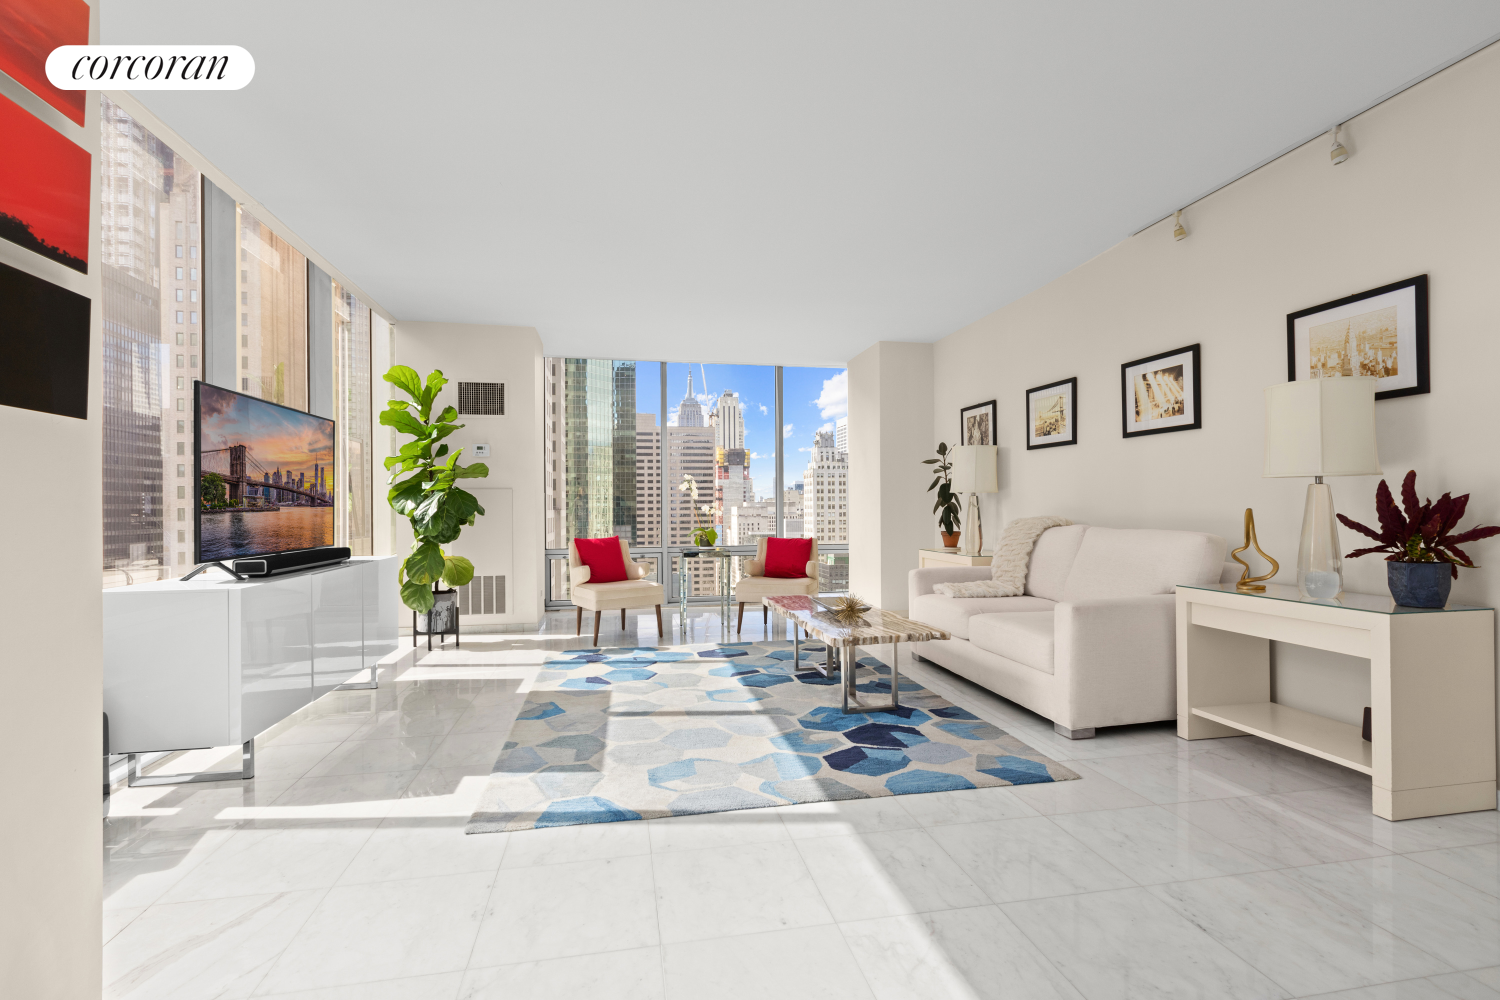 641 5th Avenue 24E, Midtown East, Midtown East, NYC - 2 Bedrooms  
2.5 Bathrooms  
4 Rooms - 